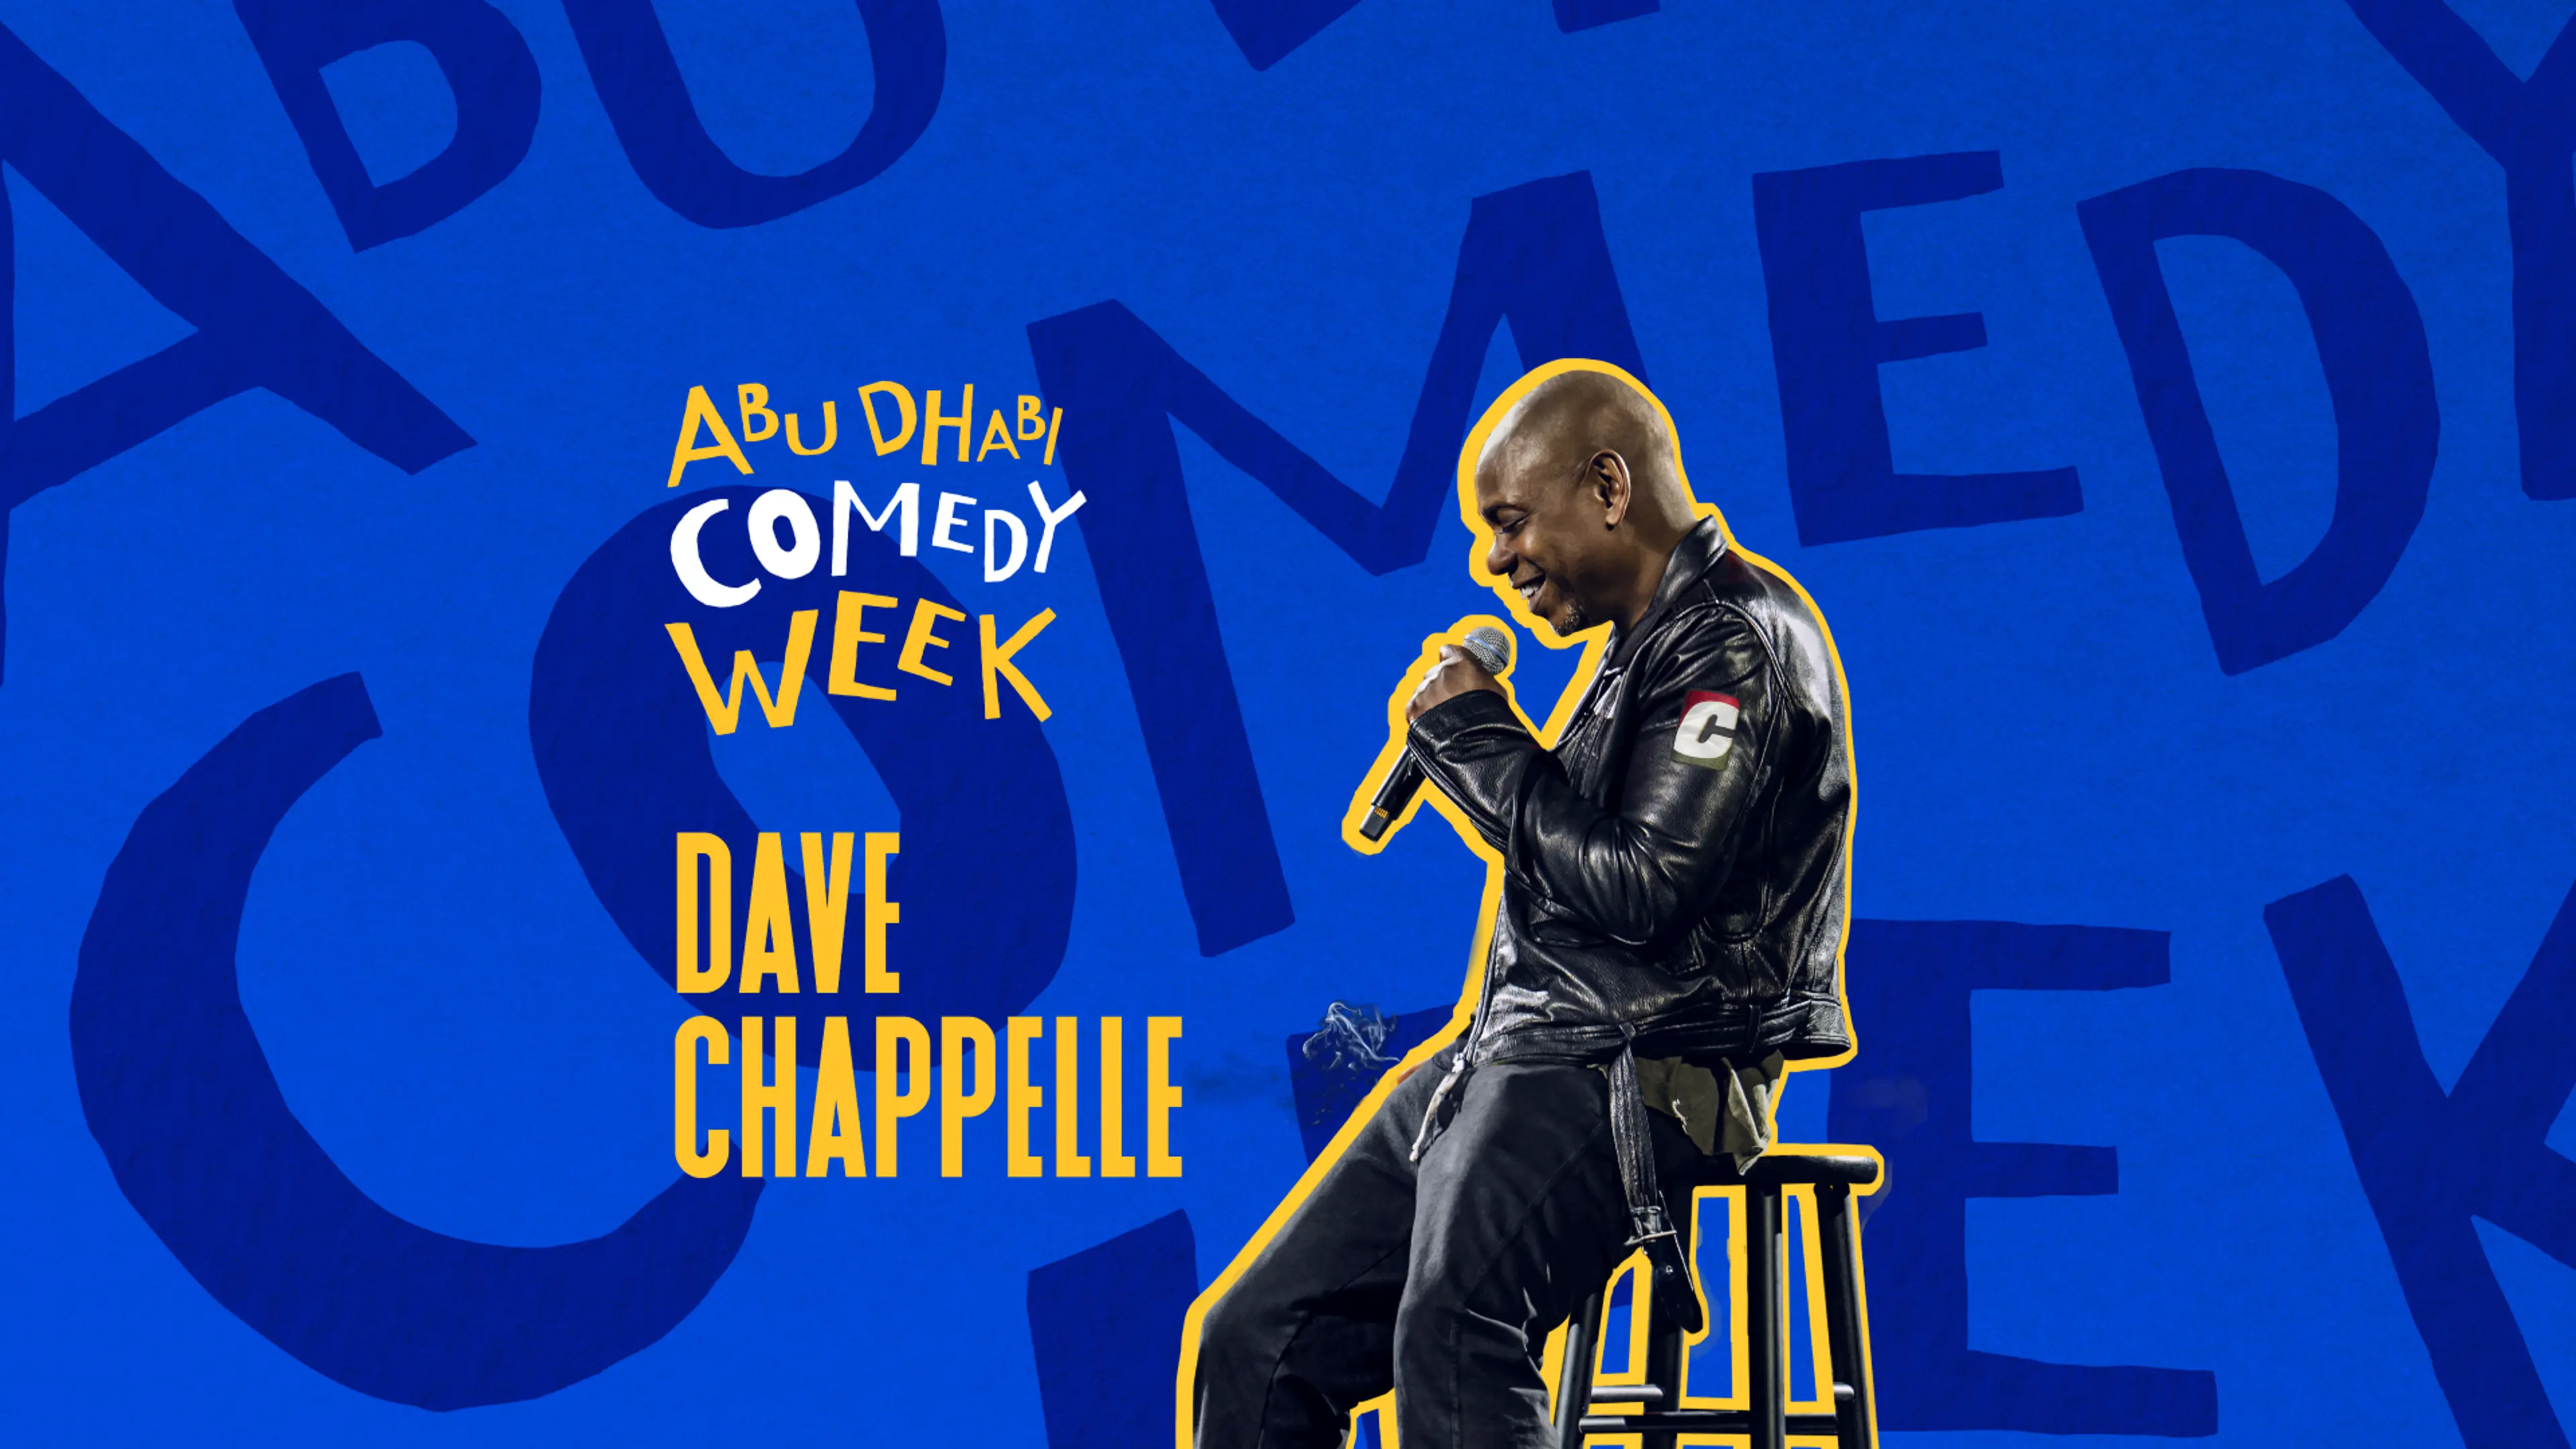 DAVE CHAPPELLE - MAY 23